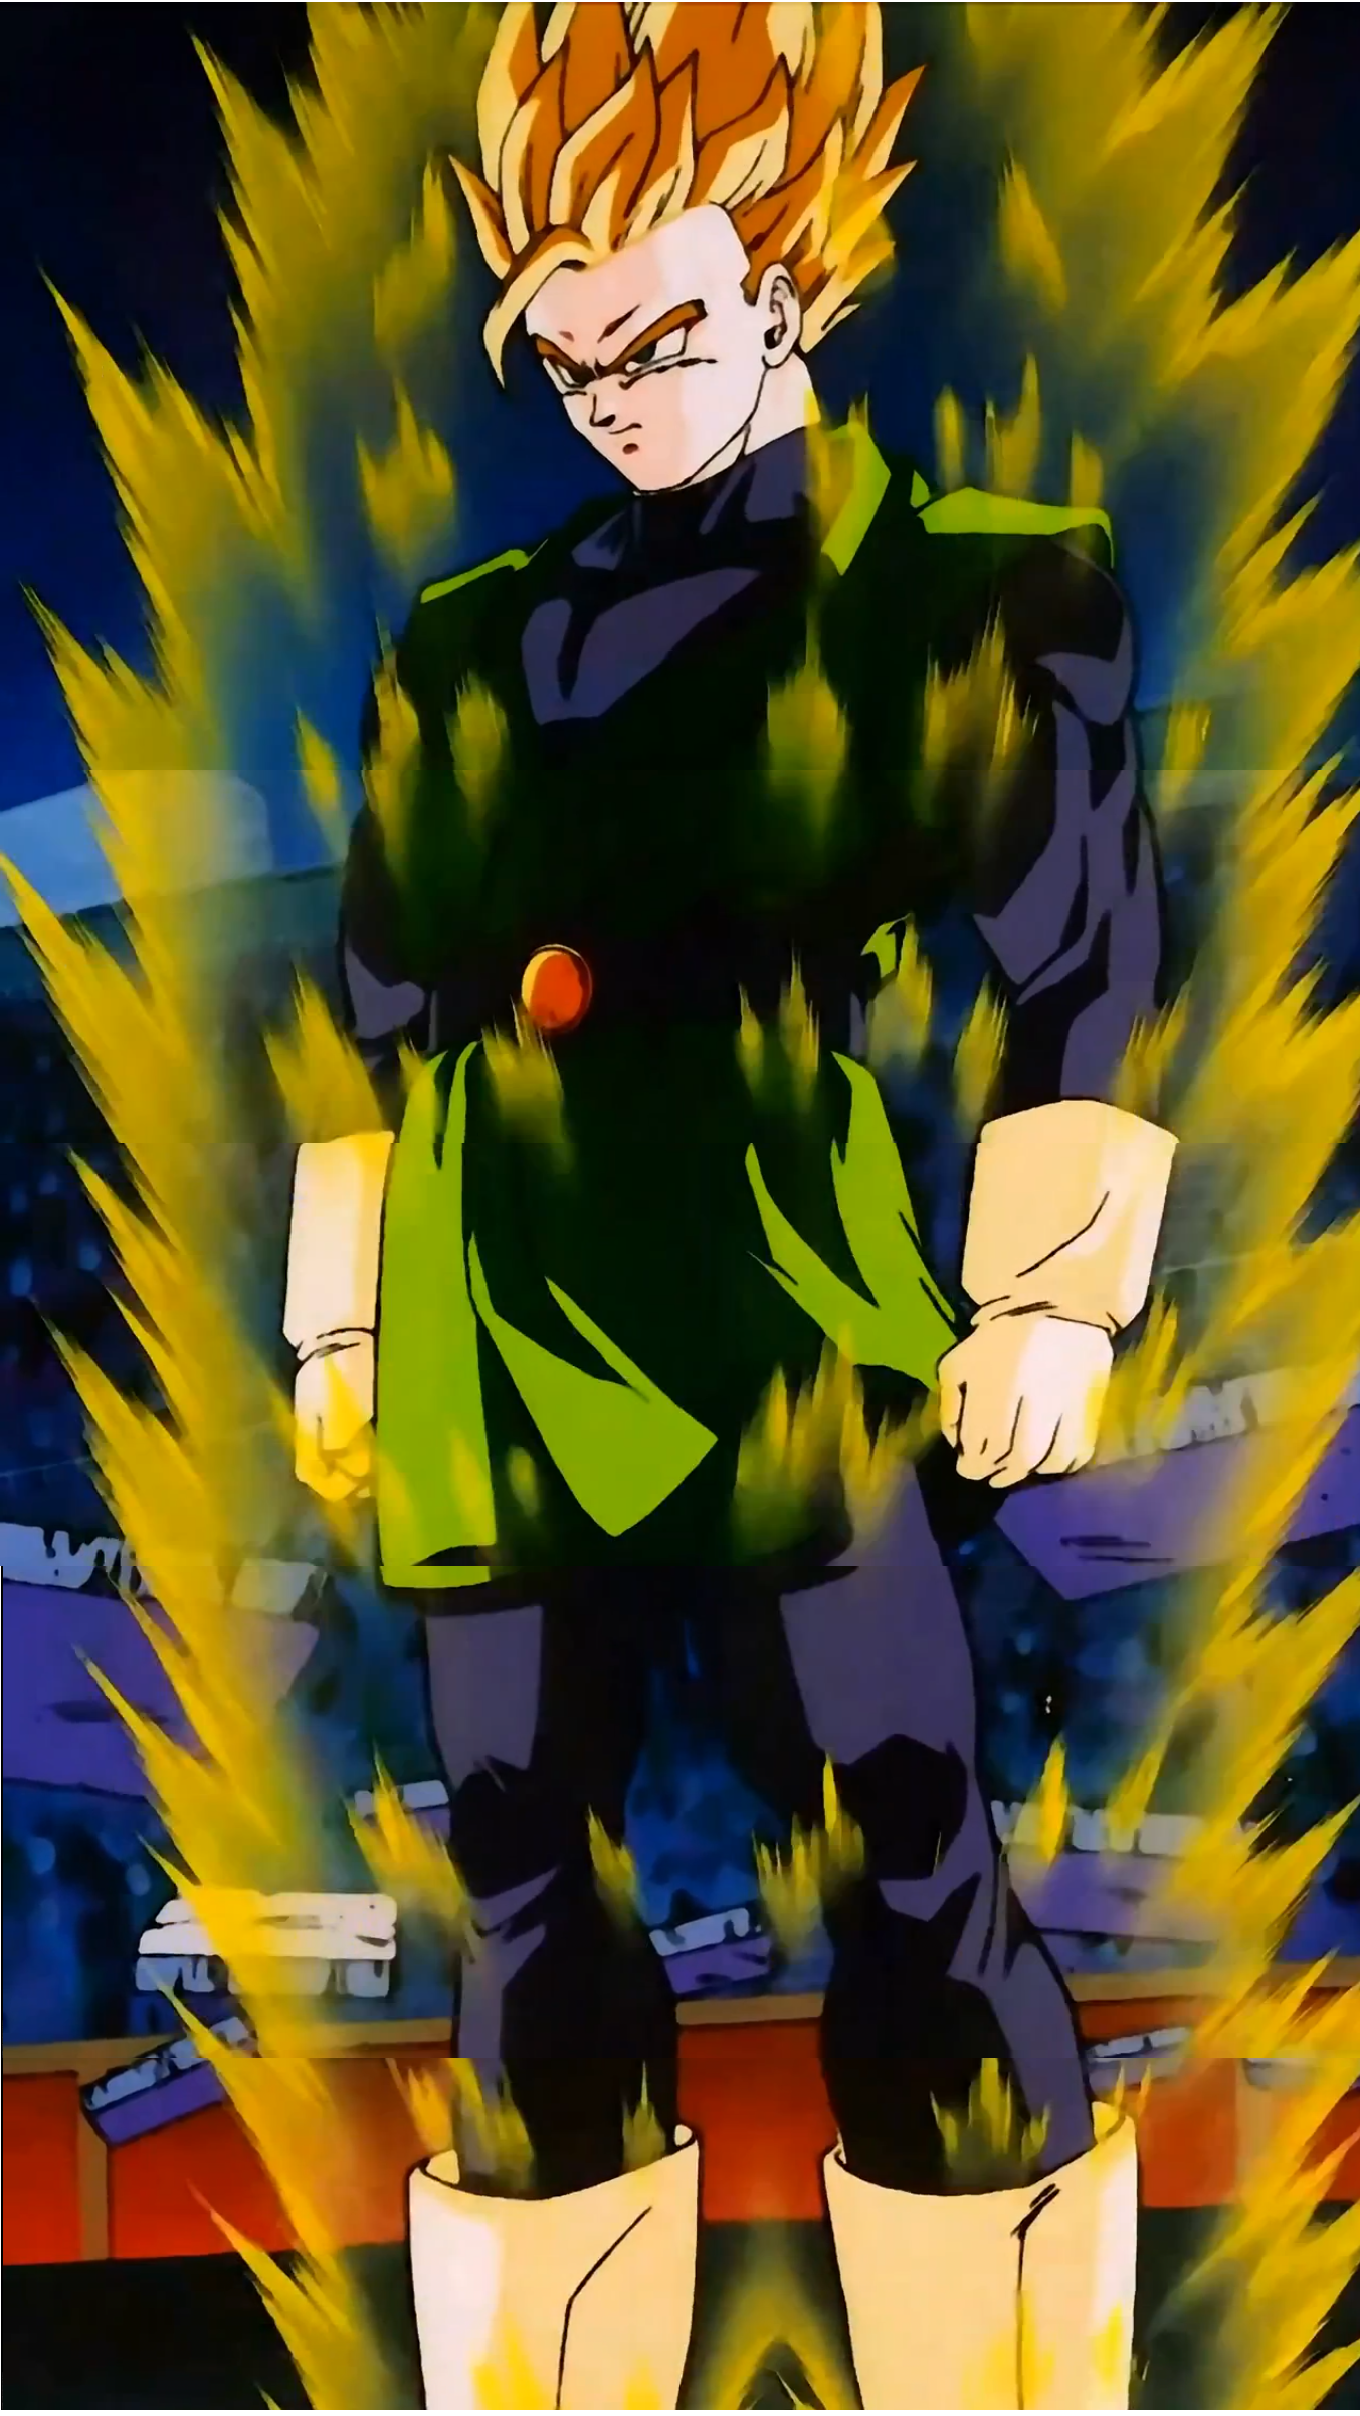 Bojack Unbound Trunks was the best looking Trunks imo : r/dbz